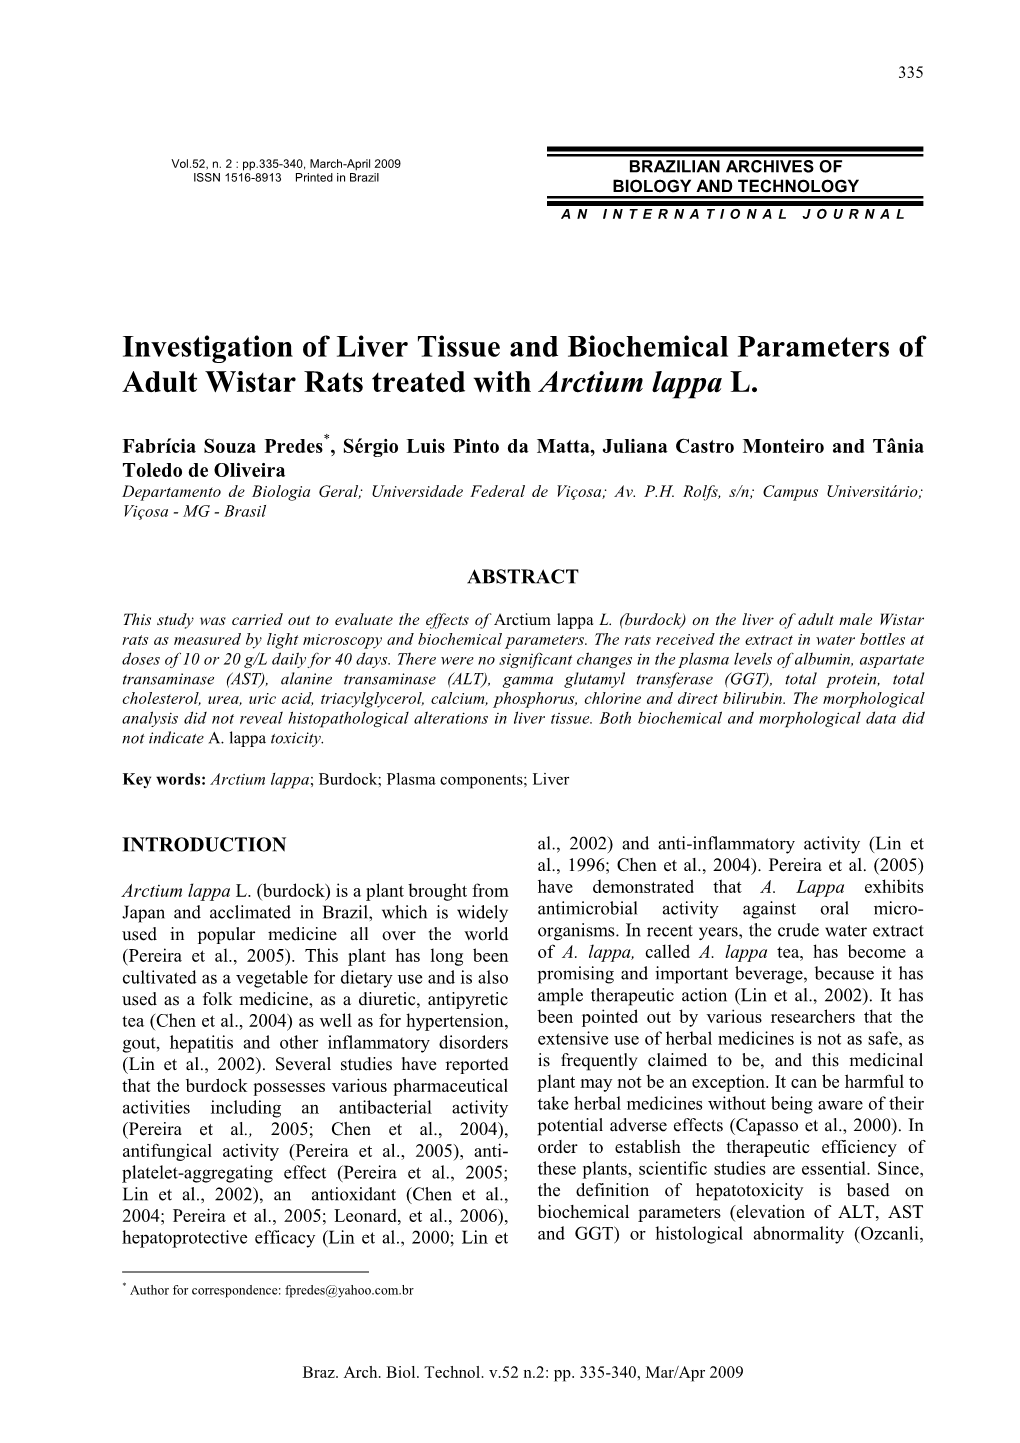 Investigation of Liver Tissue and Biochemical Parameters of Adult Wistar Rats Treated with Arctium Lappa L